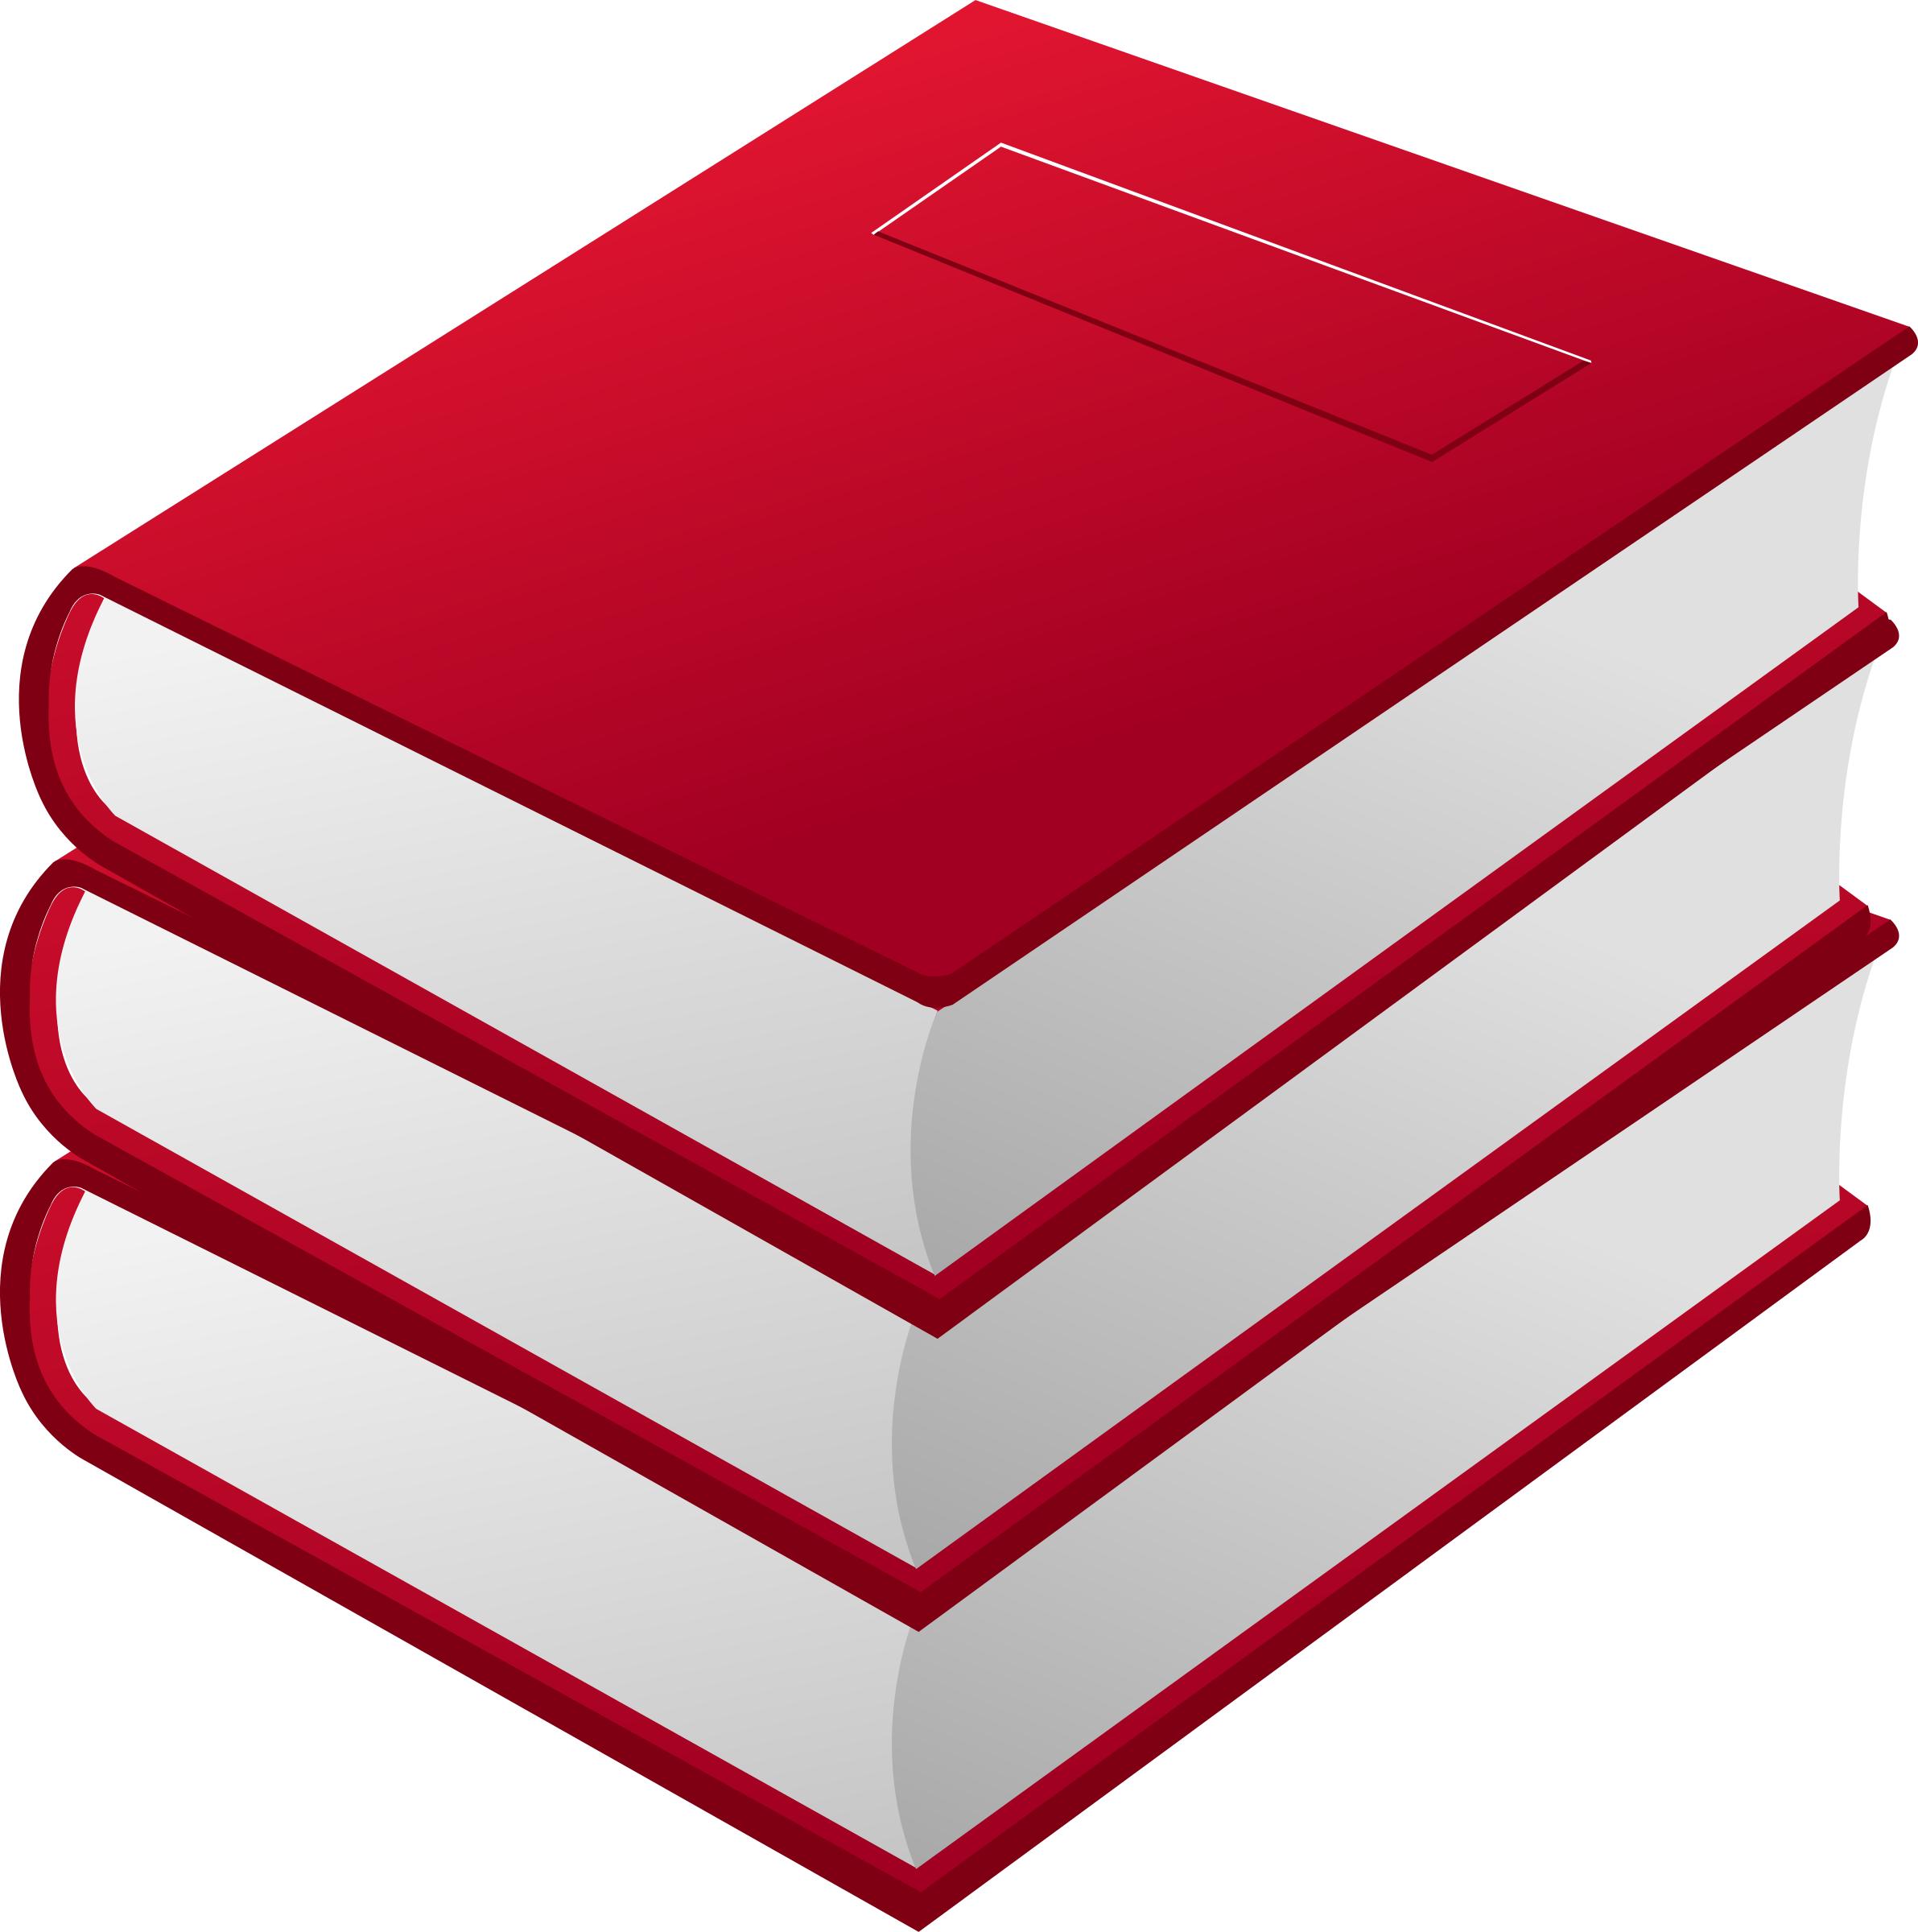 3 red books png